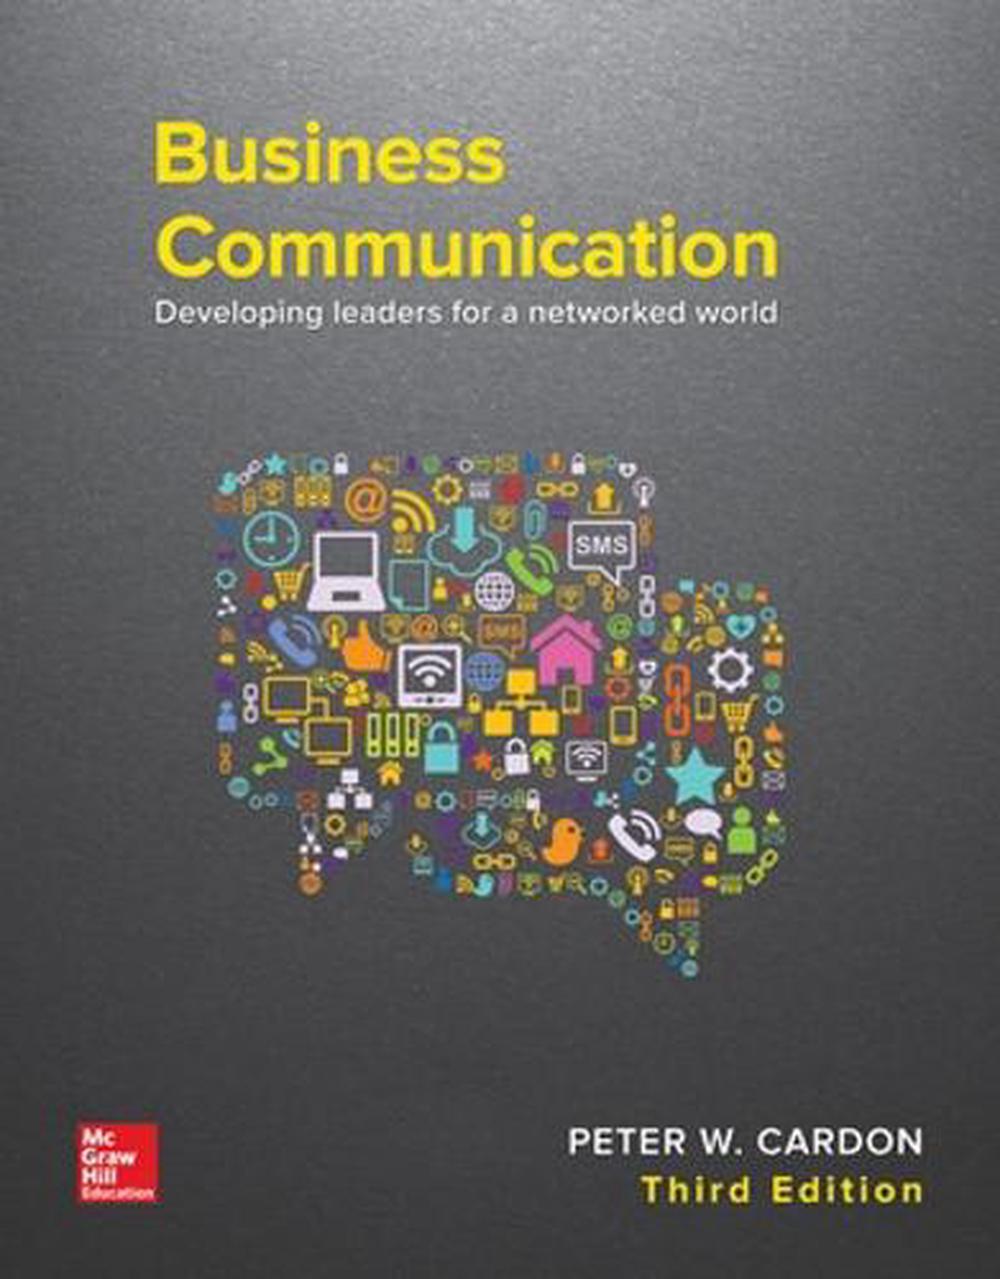 Business Communication Developing Leaders for a Networked World by